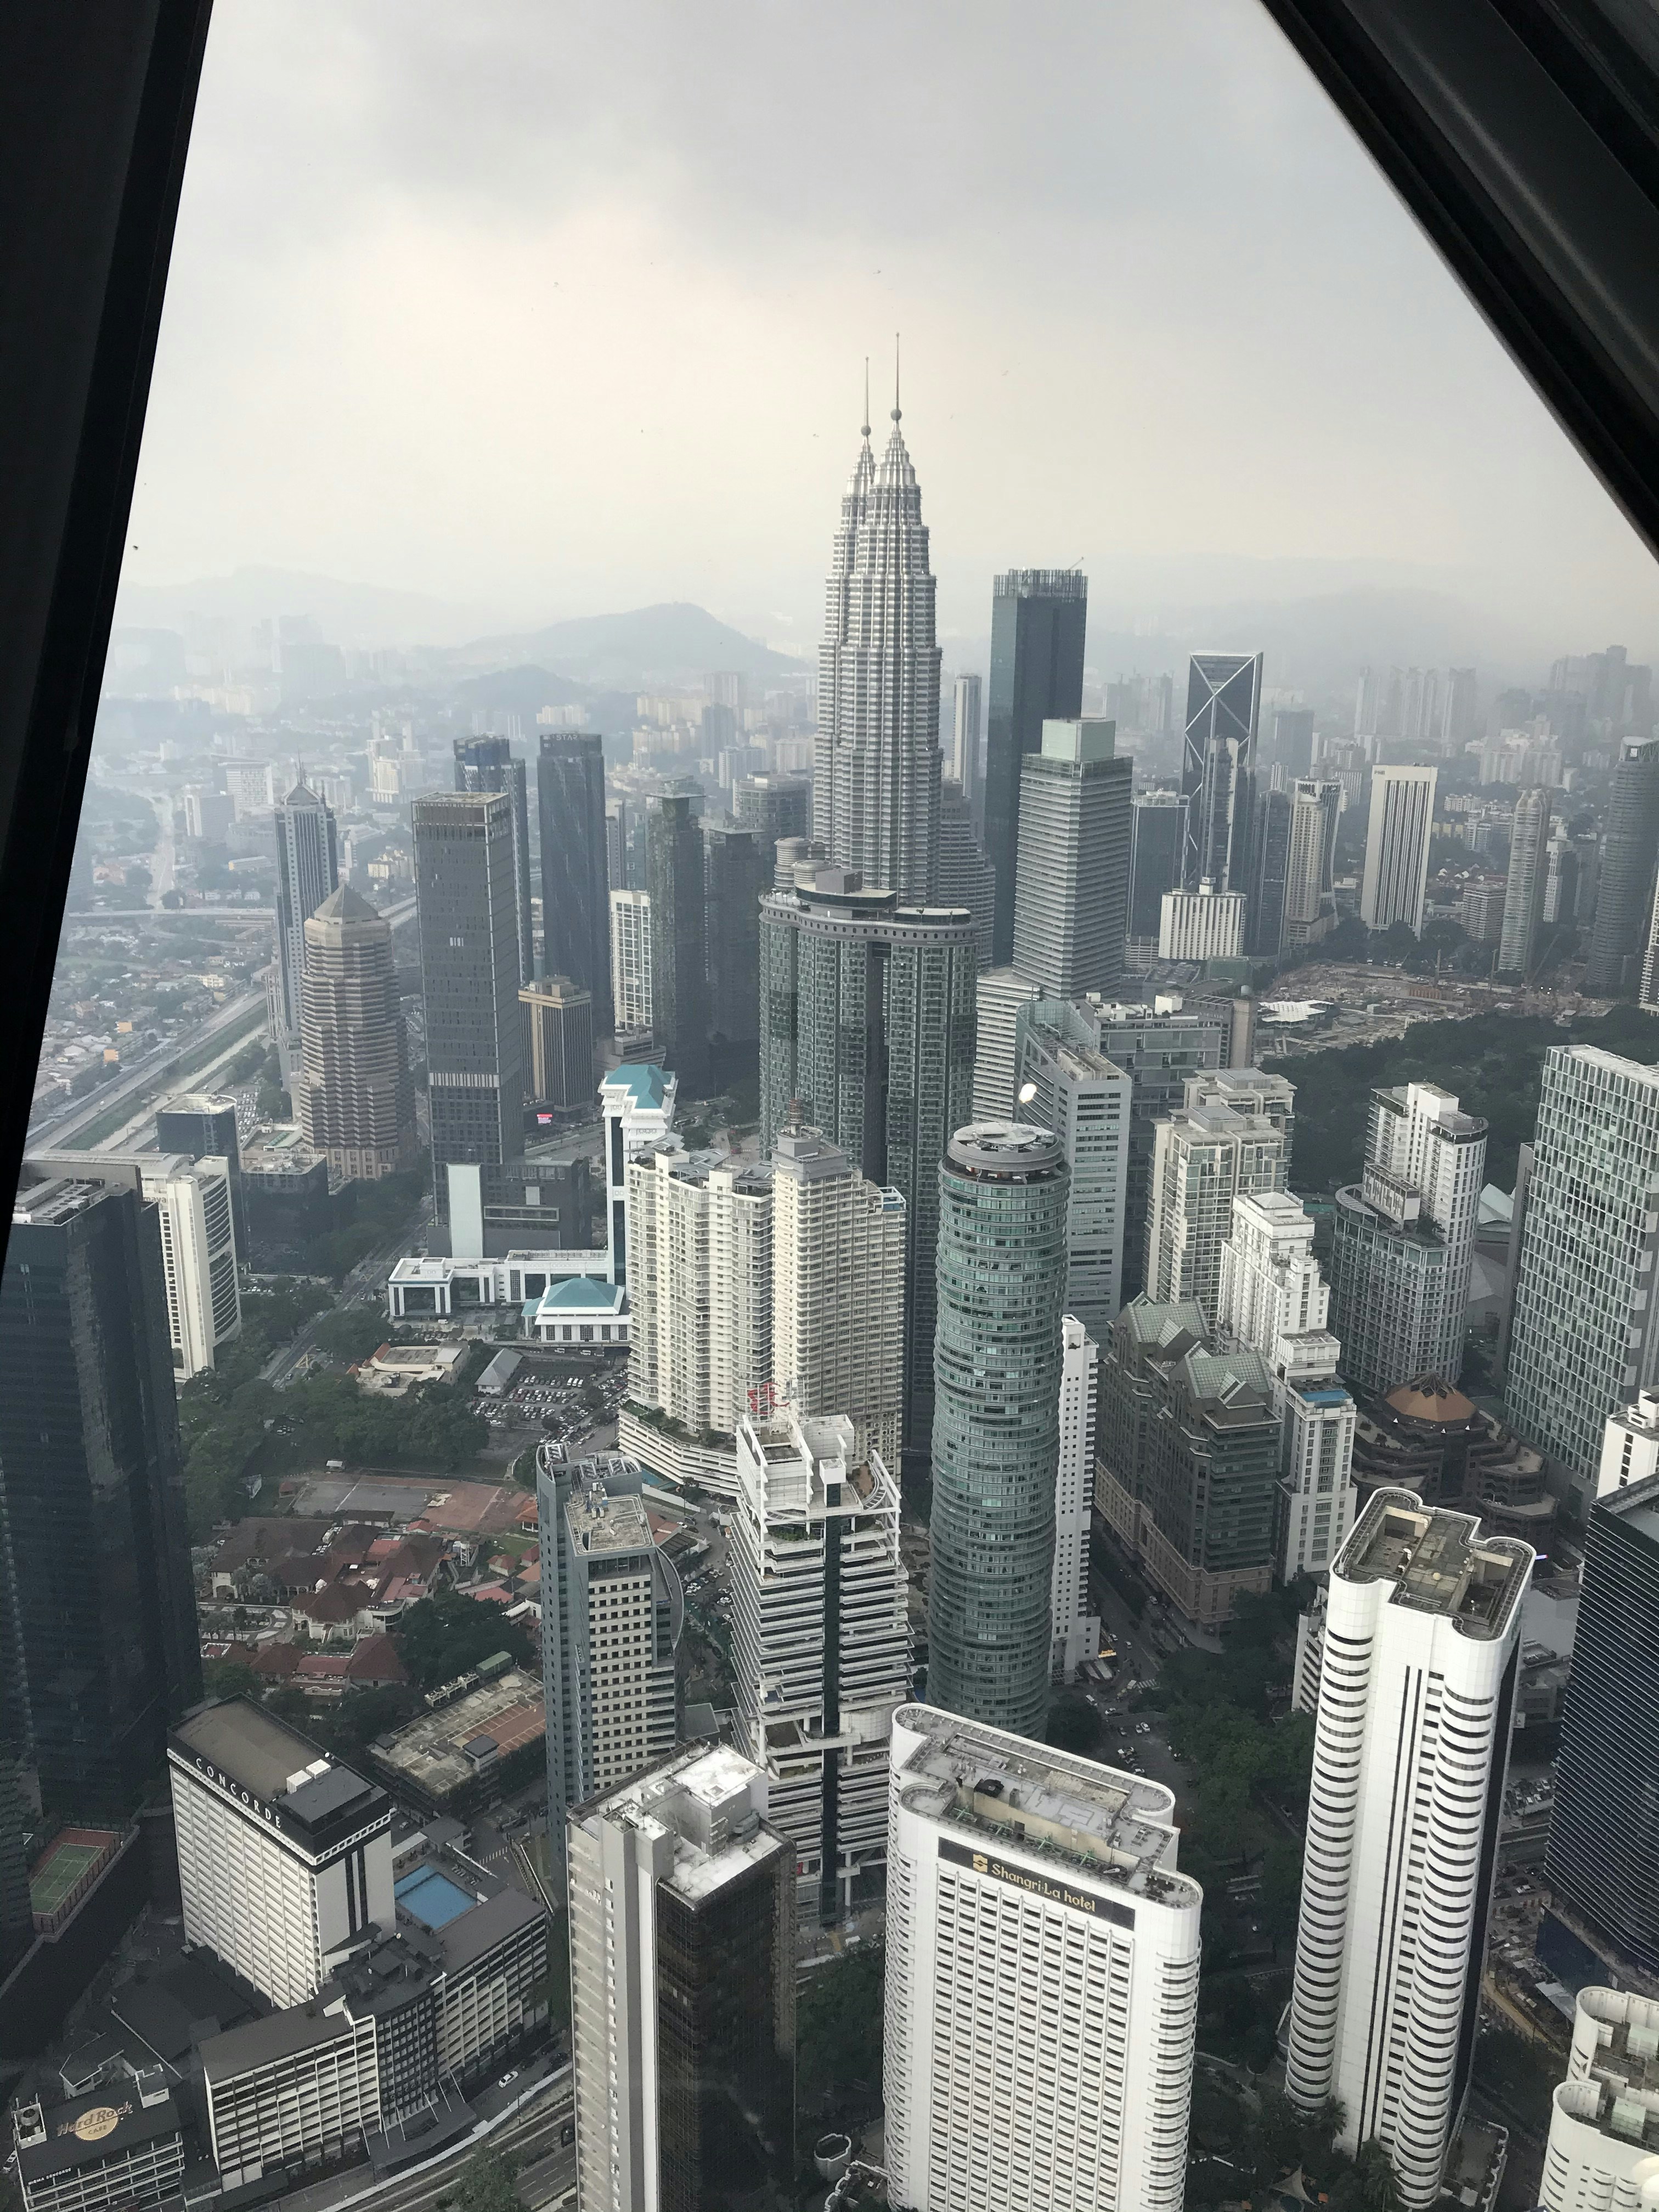 Kuala Lumpur was ranked 10th among cities to have most buildings above 100 metres with a combined height of 34,035 metres from its 244 high rise buildings[1]. As of 2019, the city of Kuala Lumpur has over 1,900[2] completed high-rises building, of which over 700 are buildings standing taller than 100 m (328 ft); 170 buildings over 150 m (492 ft), 42 buildings over 200 m (656 ft) and 5 buildings over 300 m (984 ft), the majority of it being located in the KLCC, Golden Triangle, Mont' Kiara and Old Downtown[3]. The tallest building in Kuala Lumpur is Petronas Twin Towers were the tallest buildin